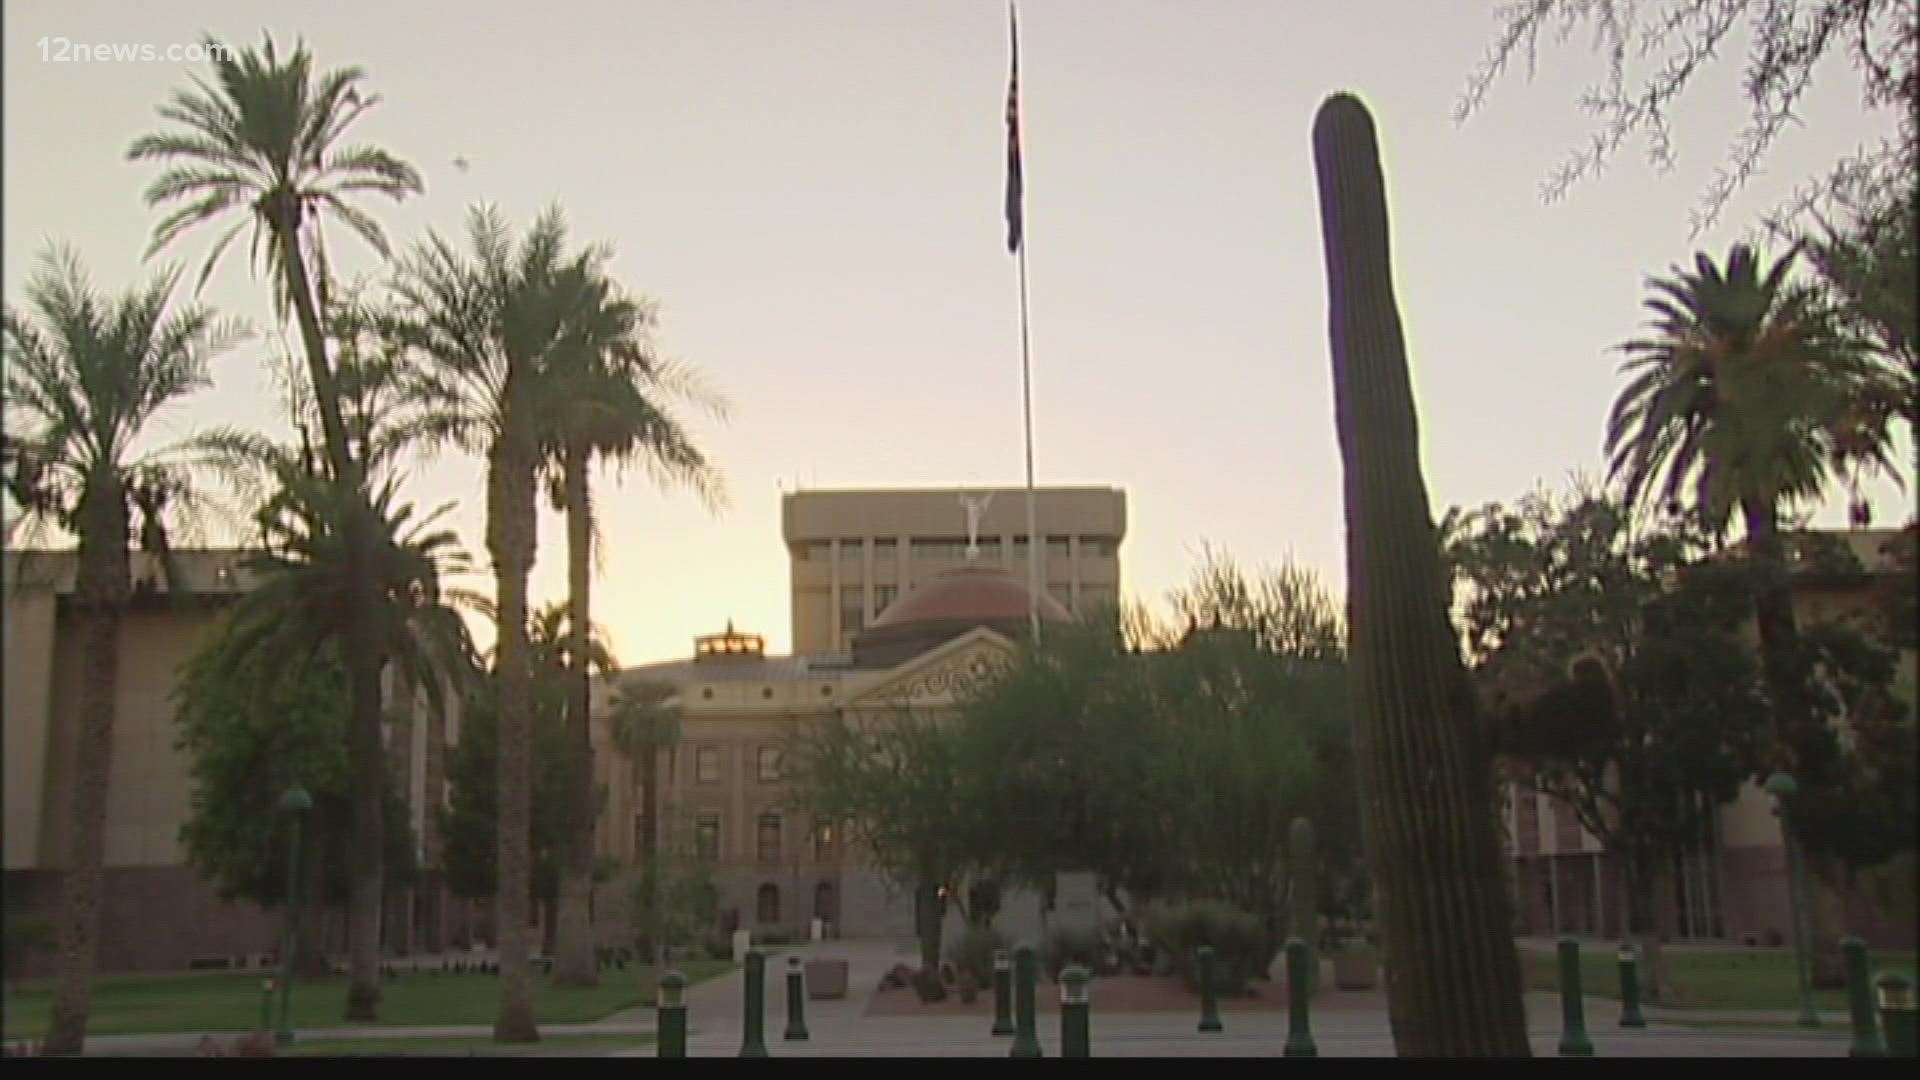 The Arizona House voted to avoid a school shutdown and give schools the ability to spend the $1.5 billion lawmakers appropriated last fall.